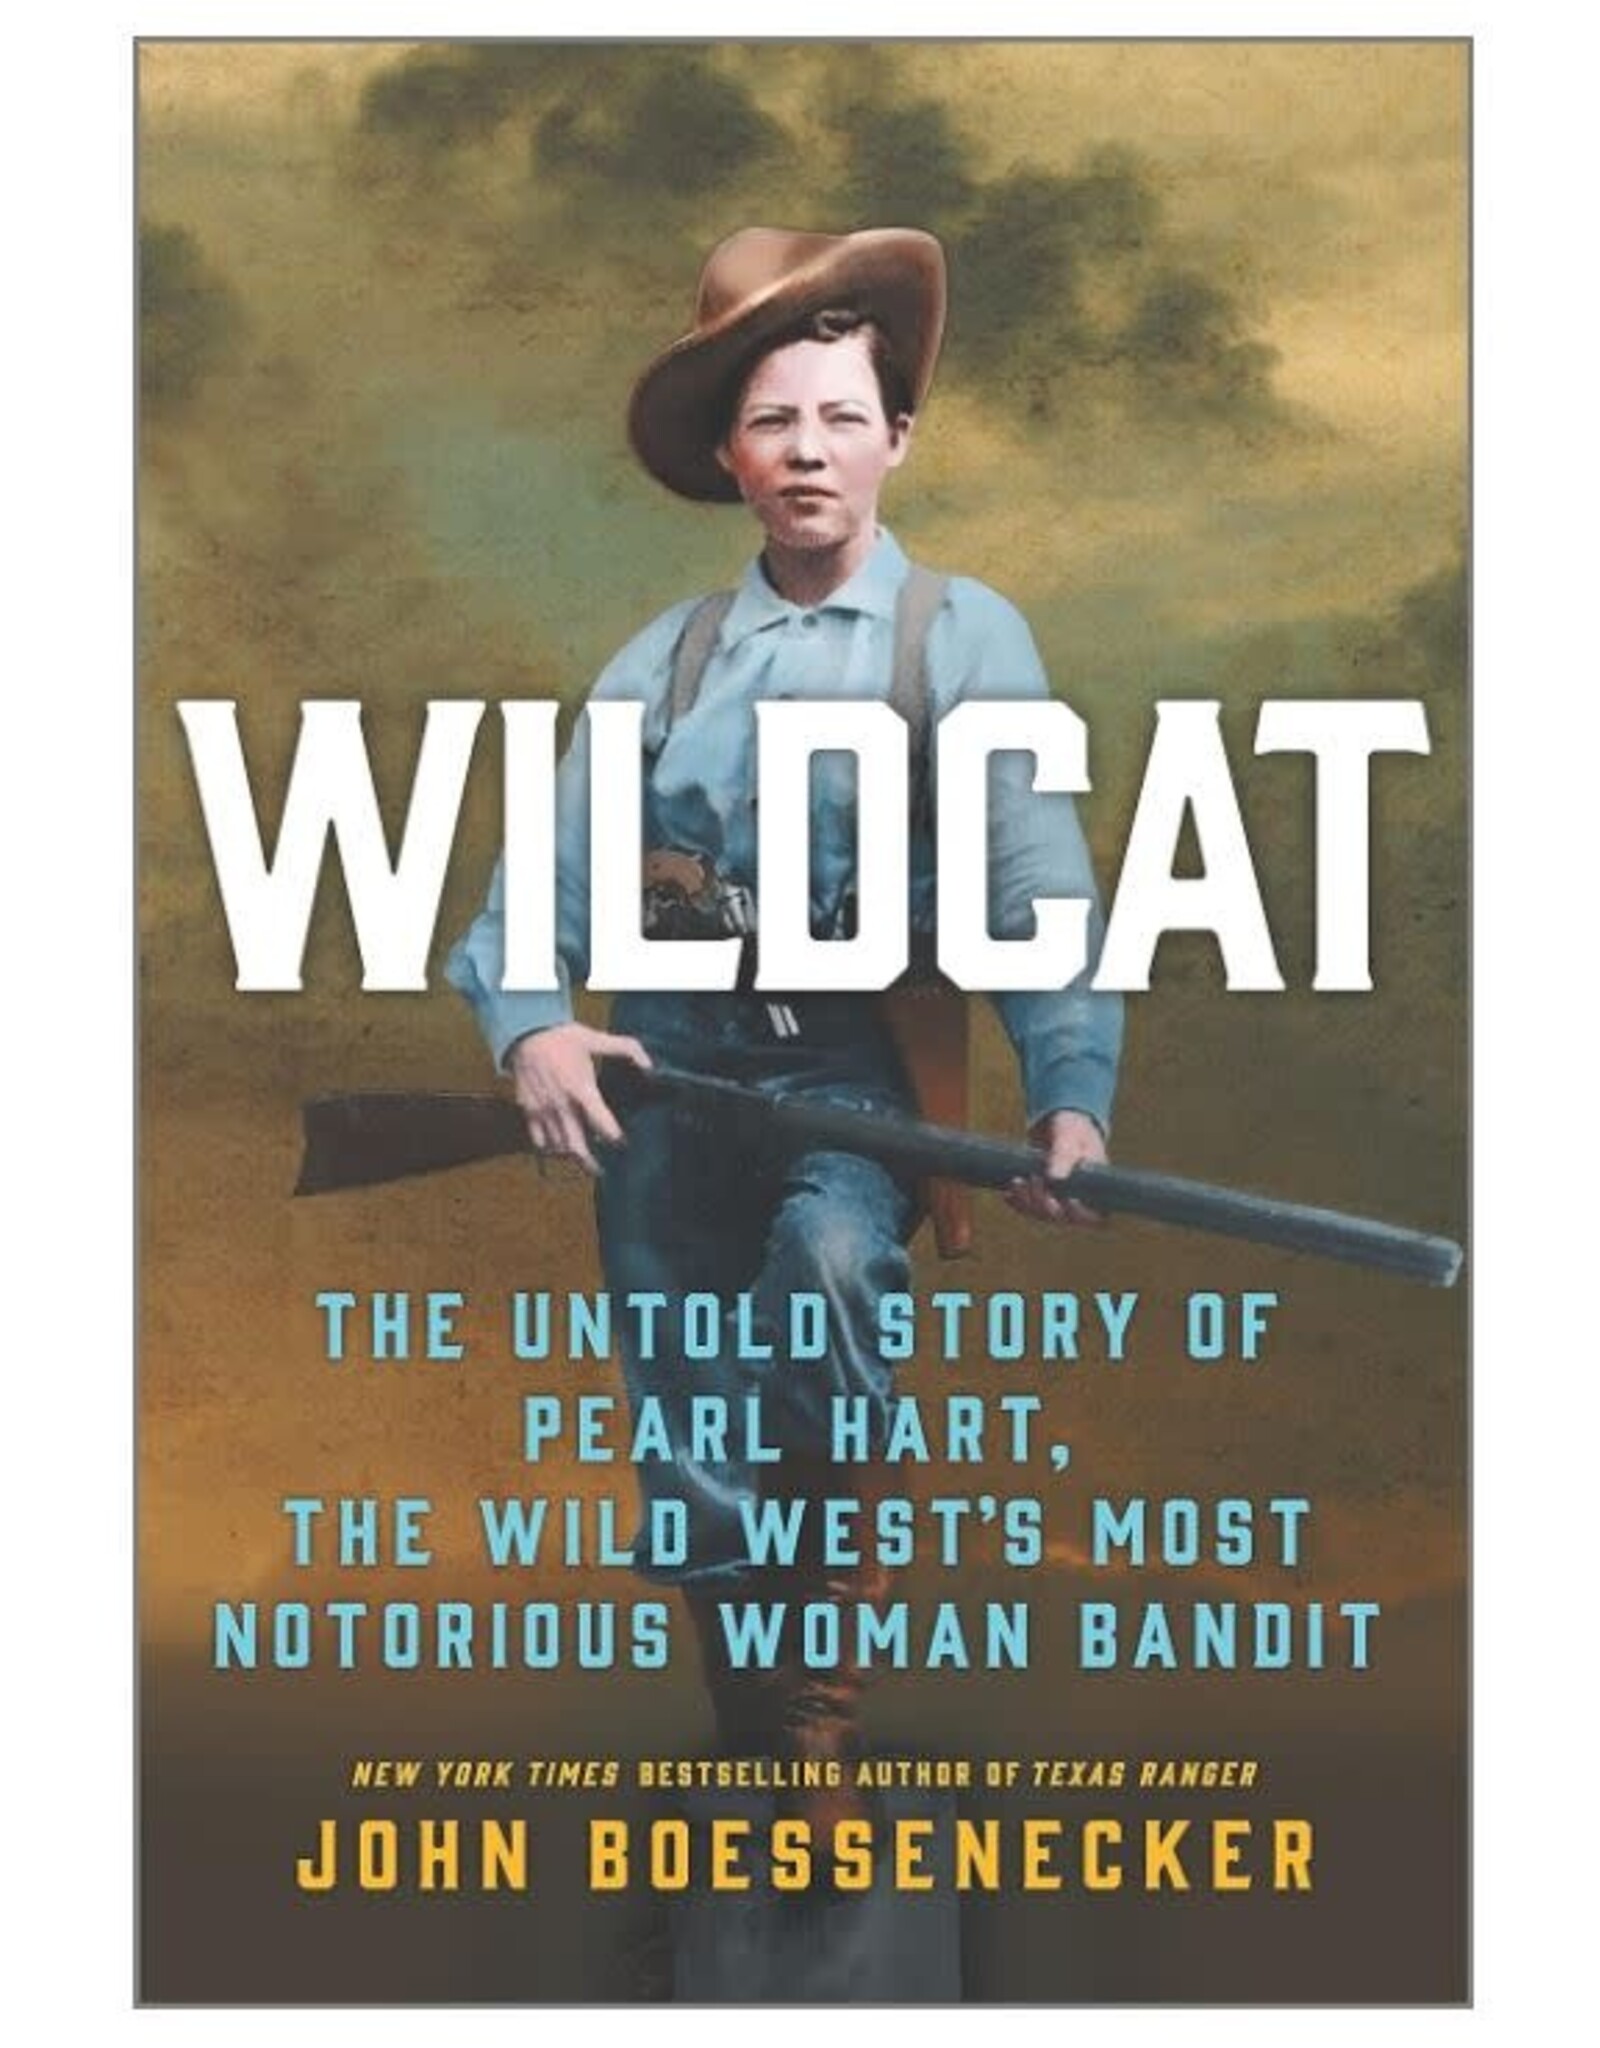 Wildcat: the Untold Story of Pearl Hart, the West's Most Notorious Woman Bandit